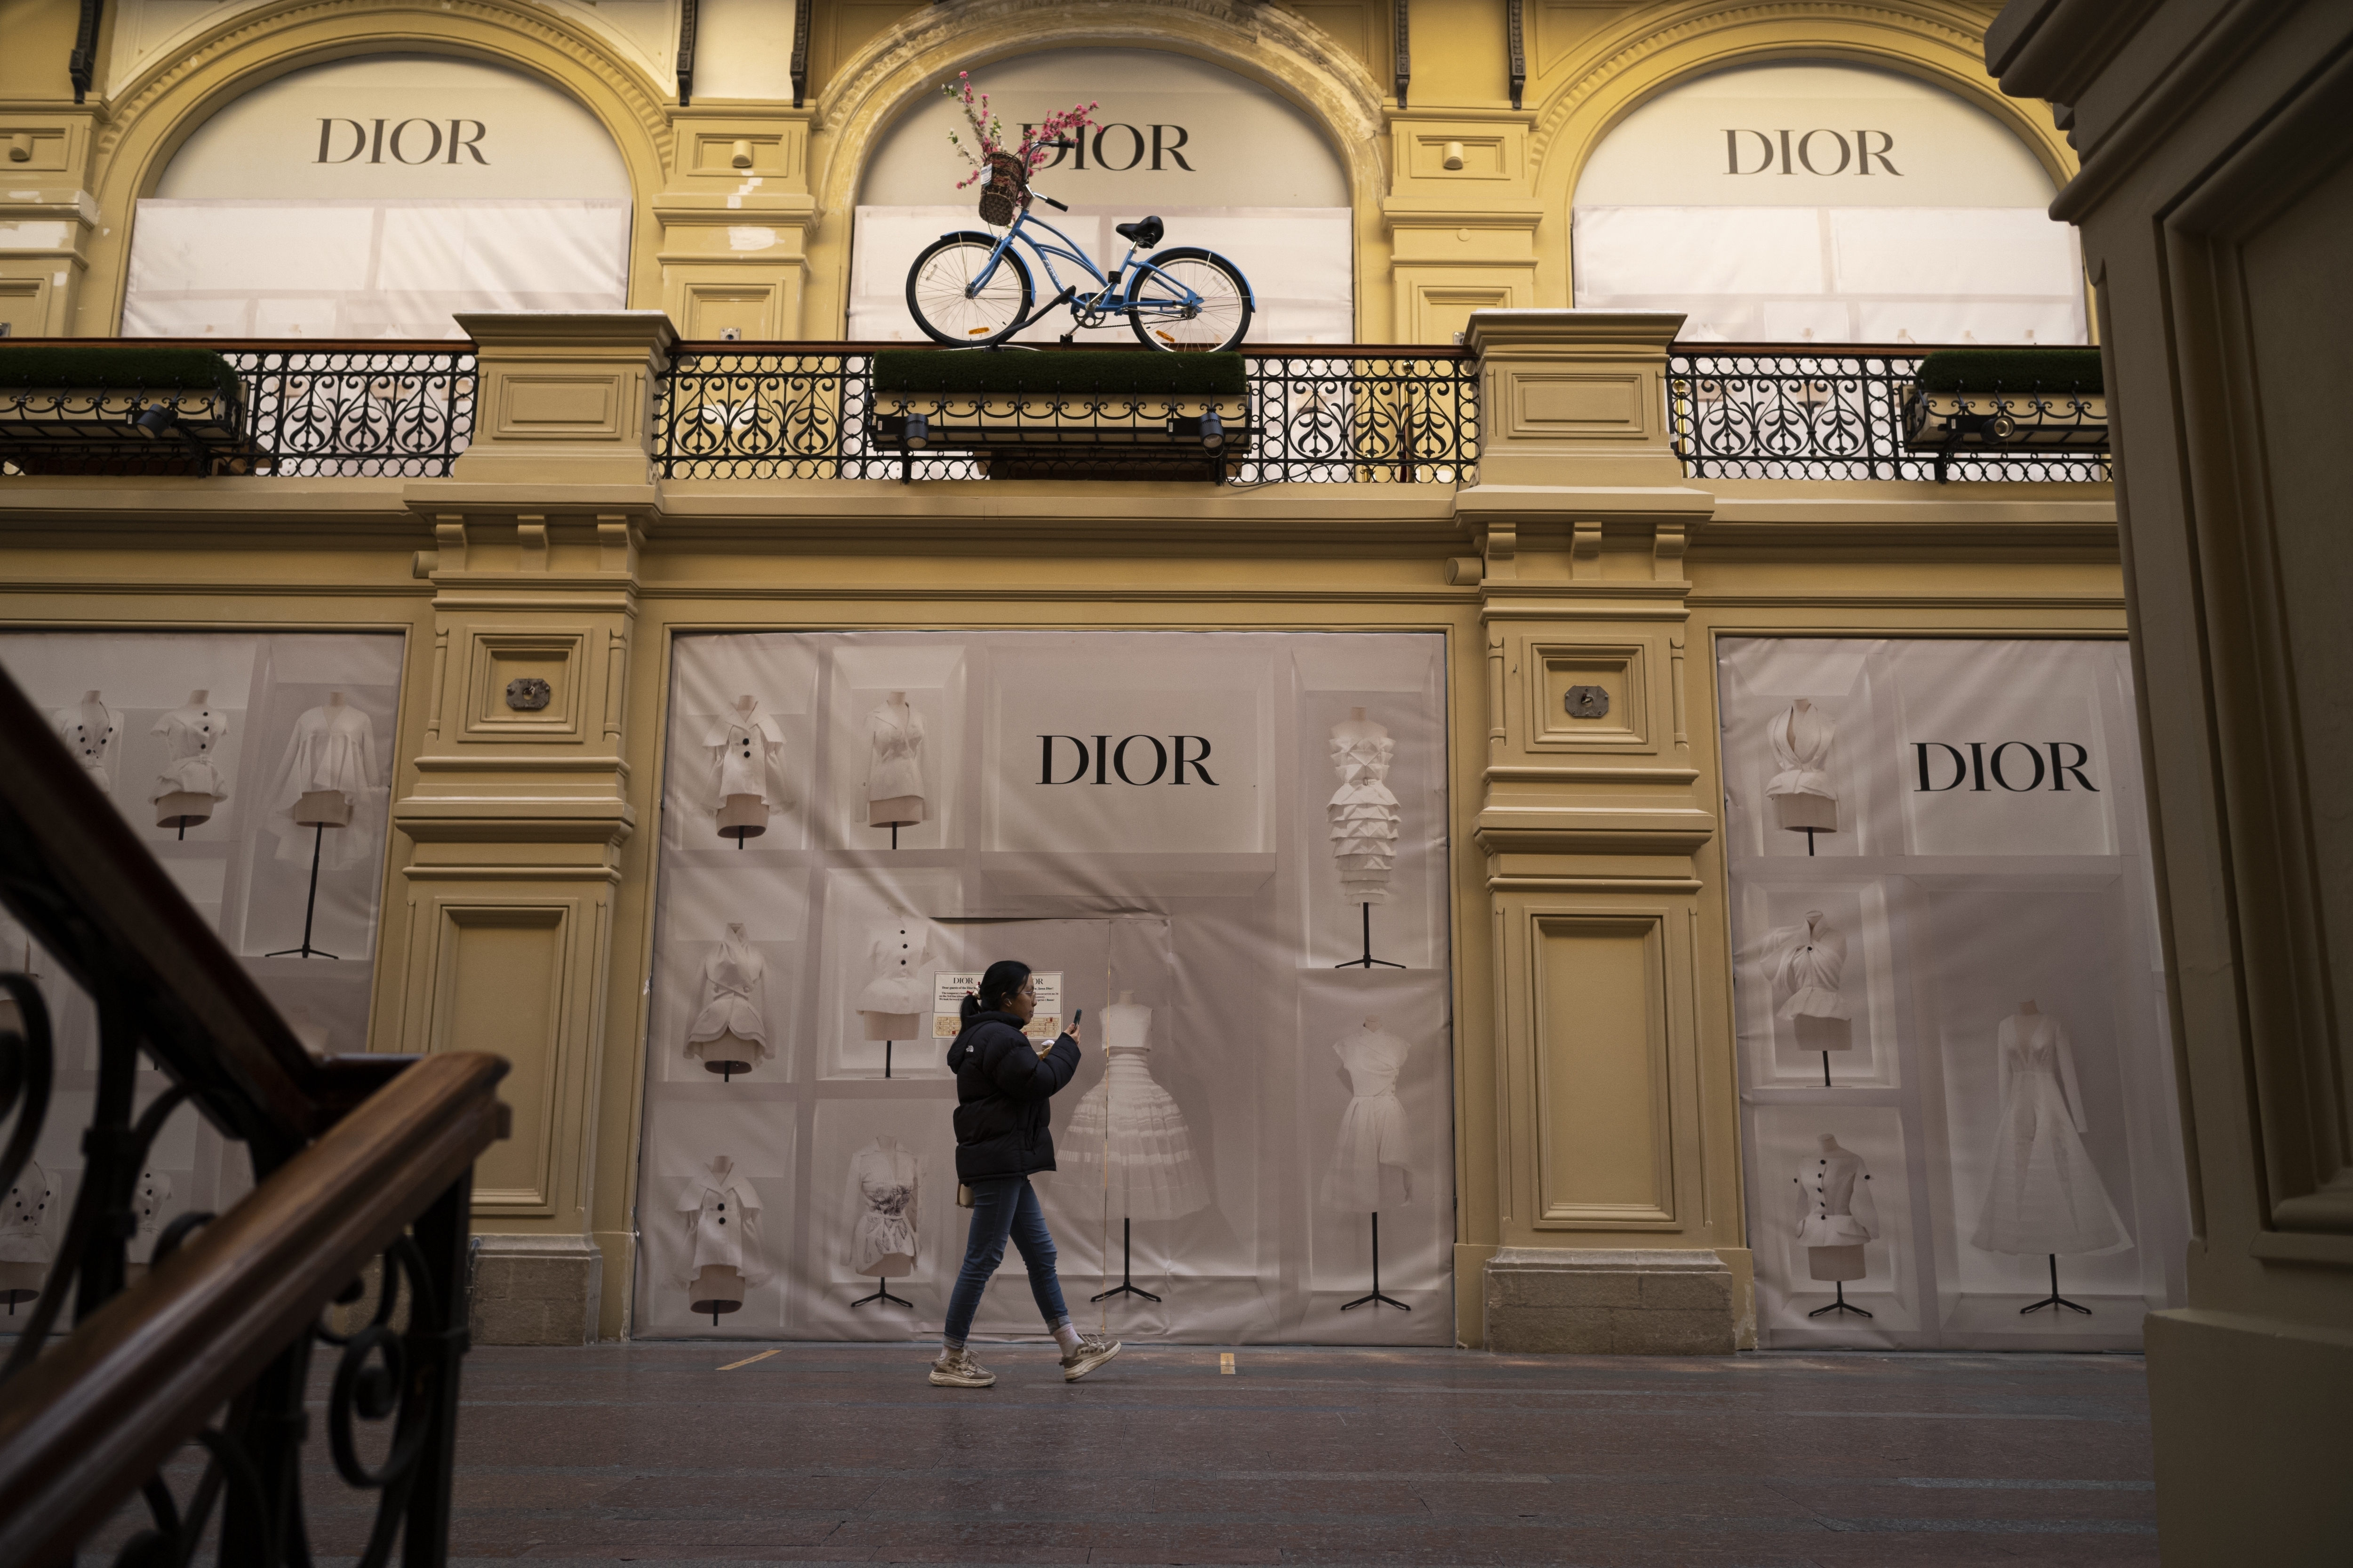 LeaveRussia: Christian Dior is Reducing its Business Operations in Russia